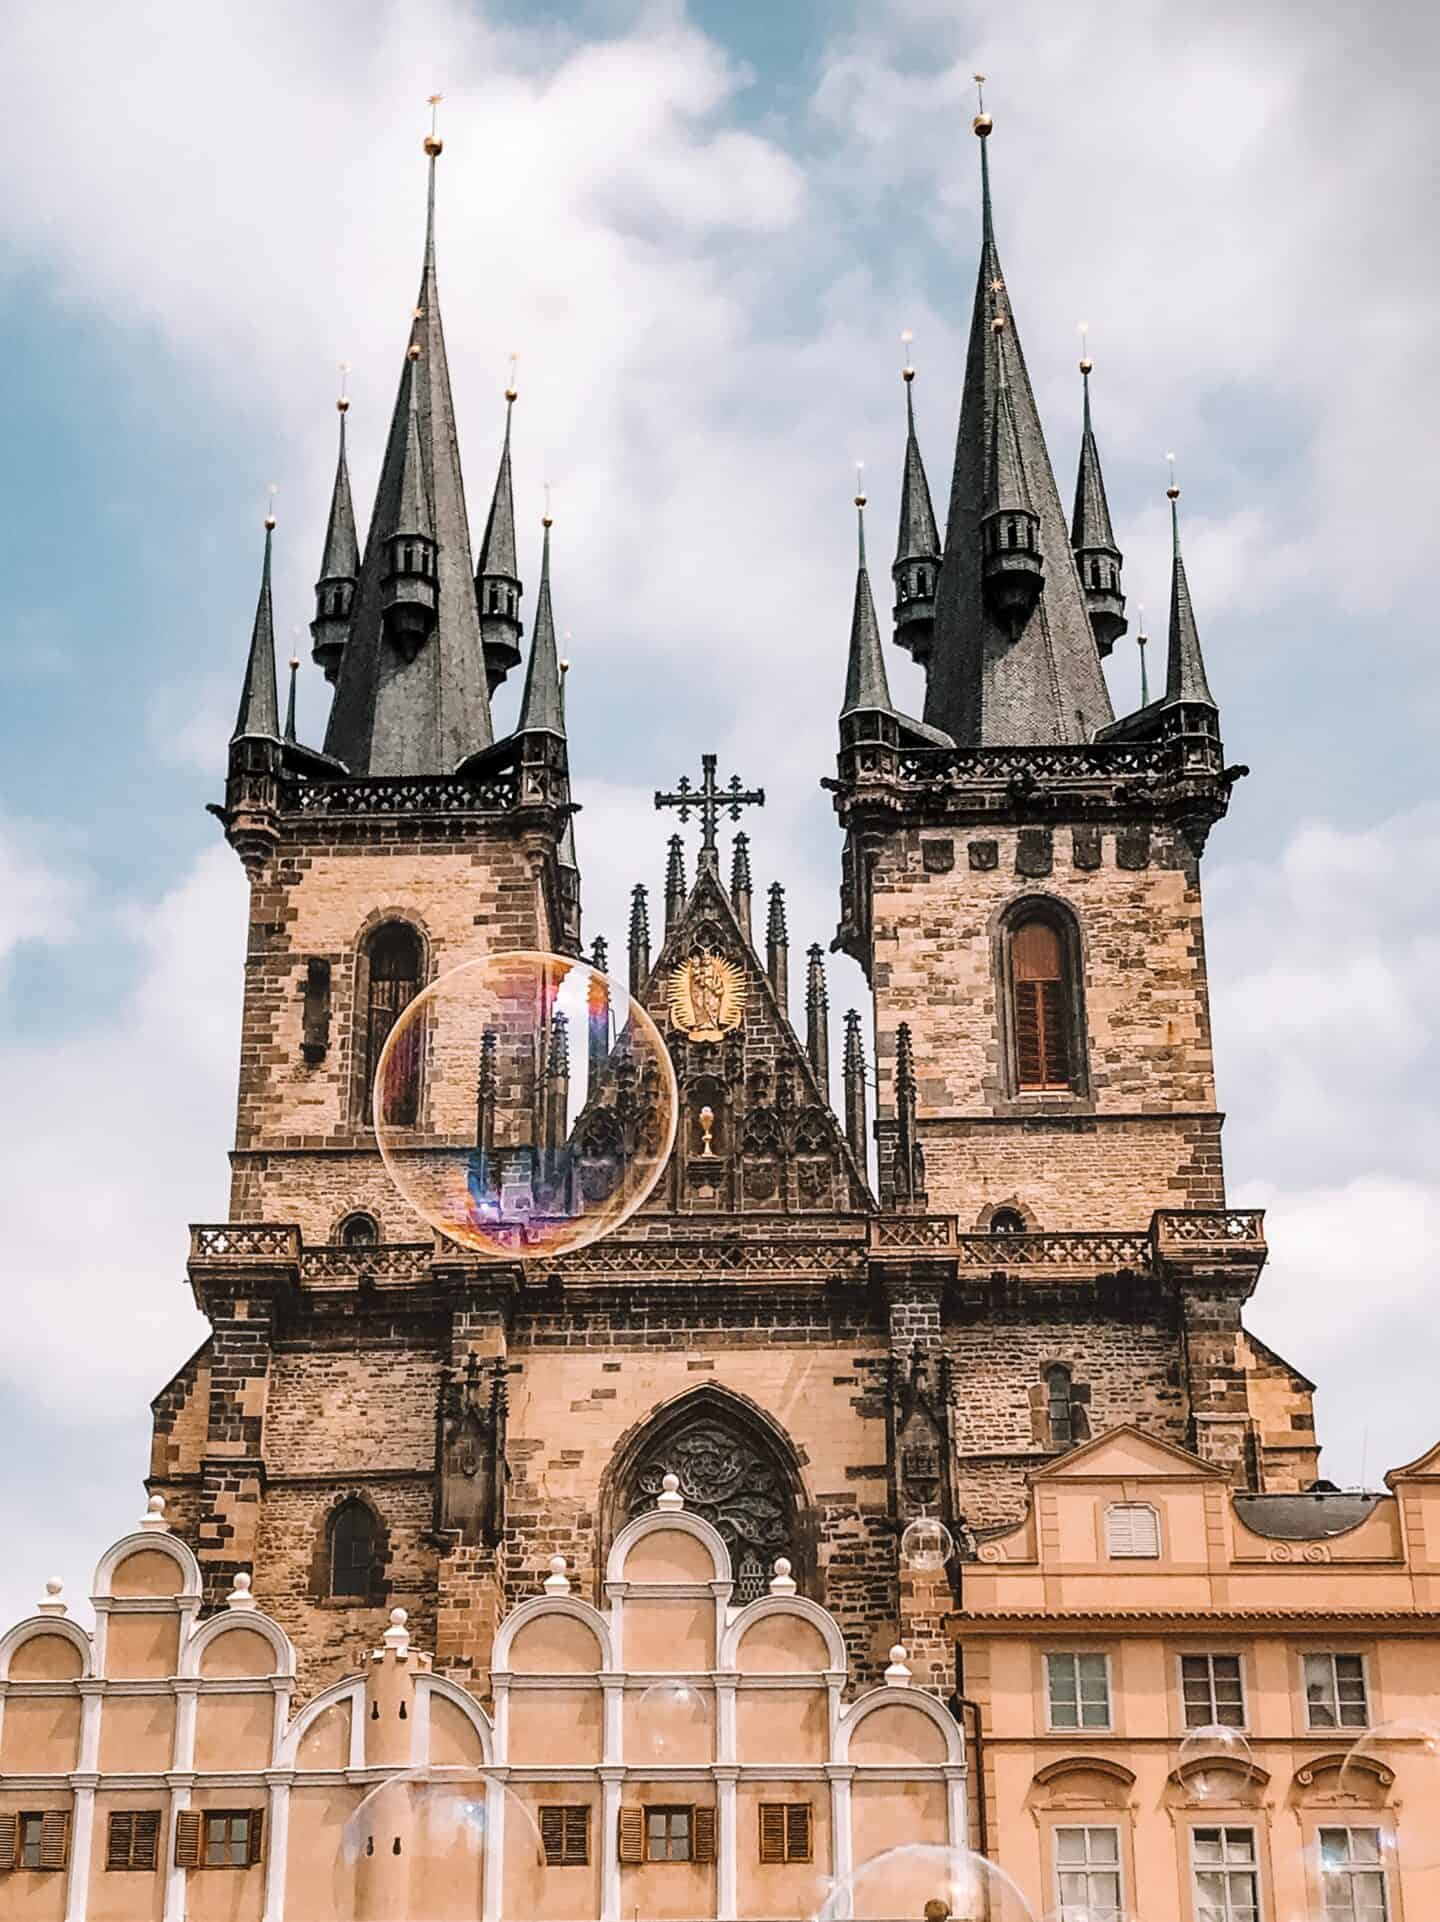 The Church of Our Lady before Tyn is a must-see on your 4 days in Prague itinerary.